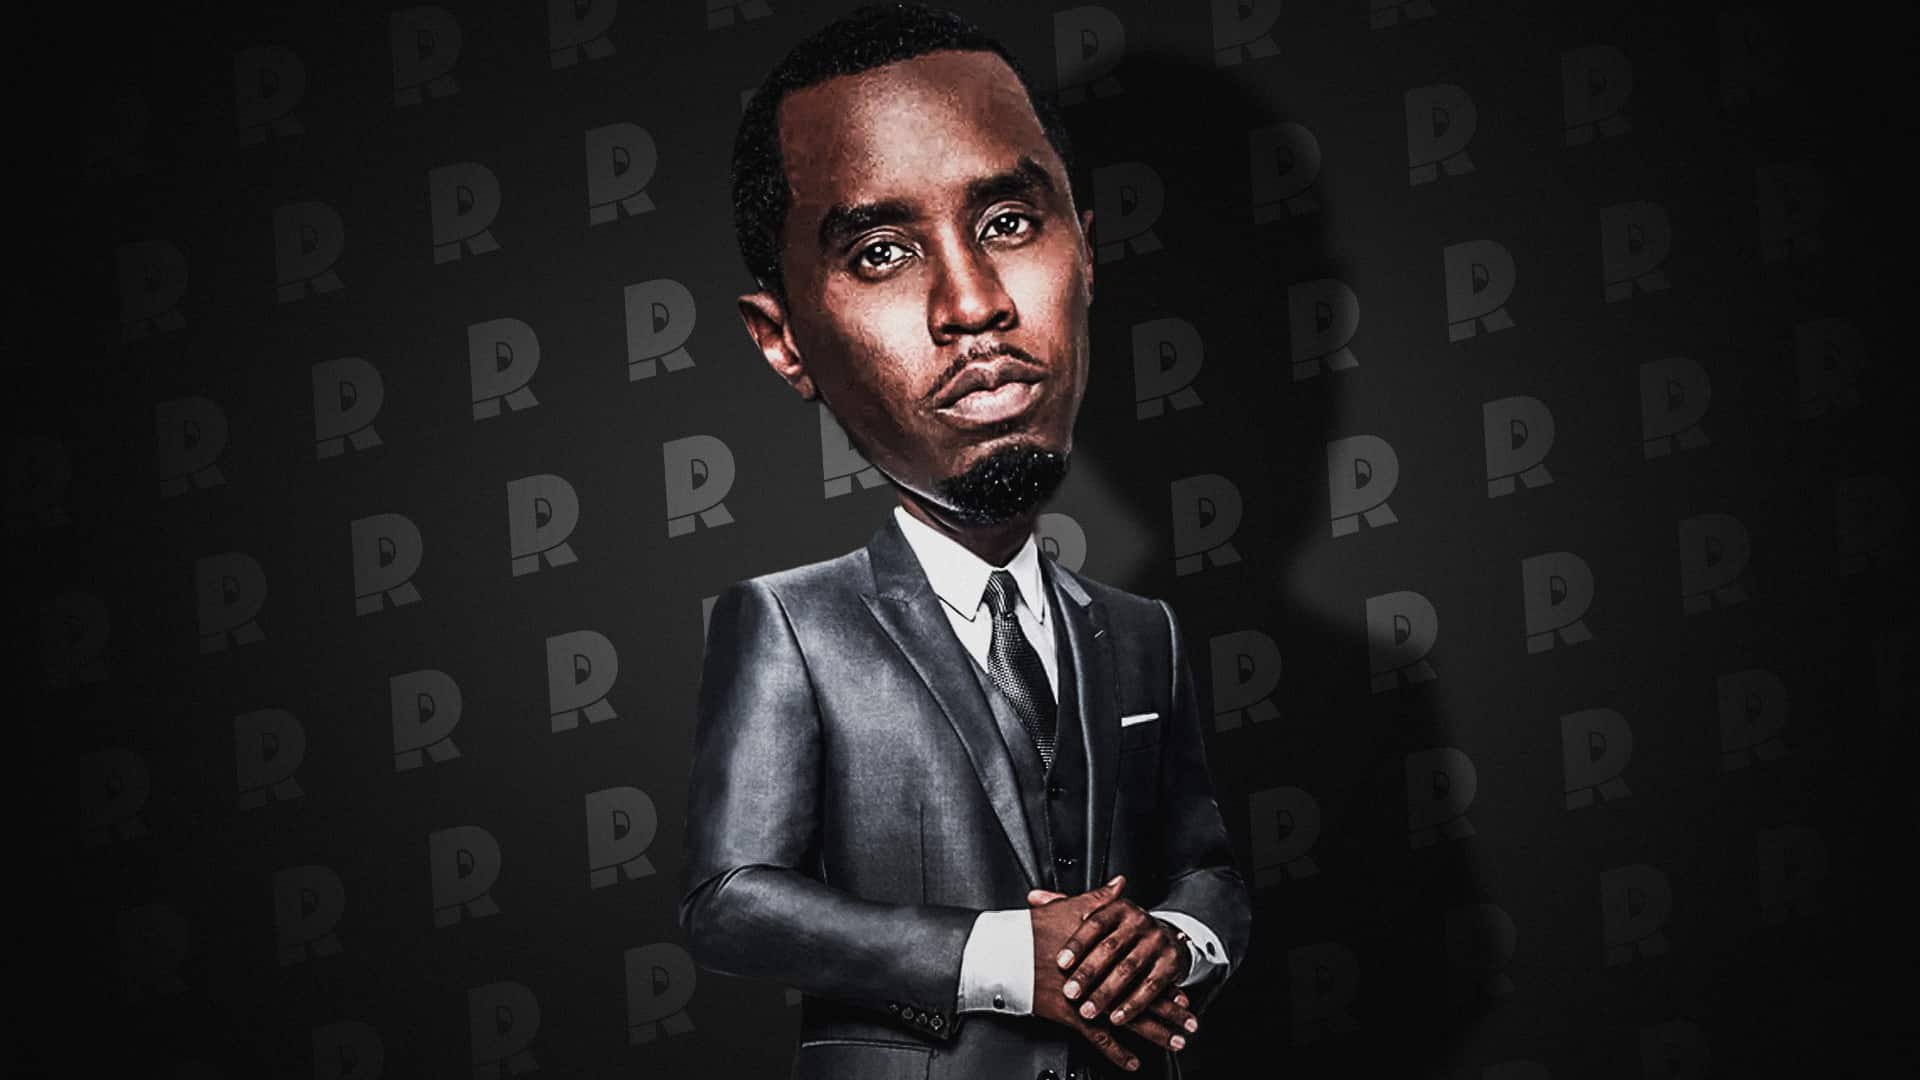 P Diddy Net worth $900 Million - Who Is the Richest Hip Hop Artist in the World of 2022?